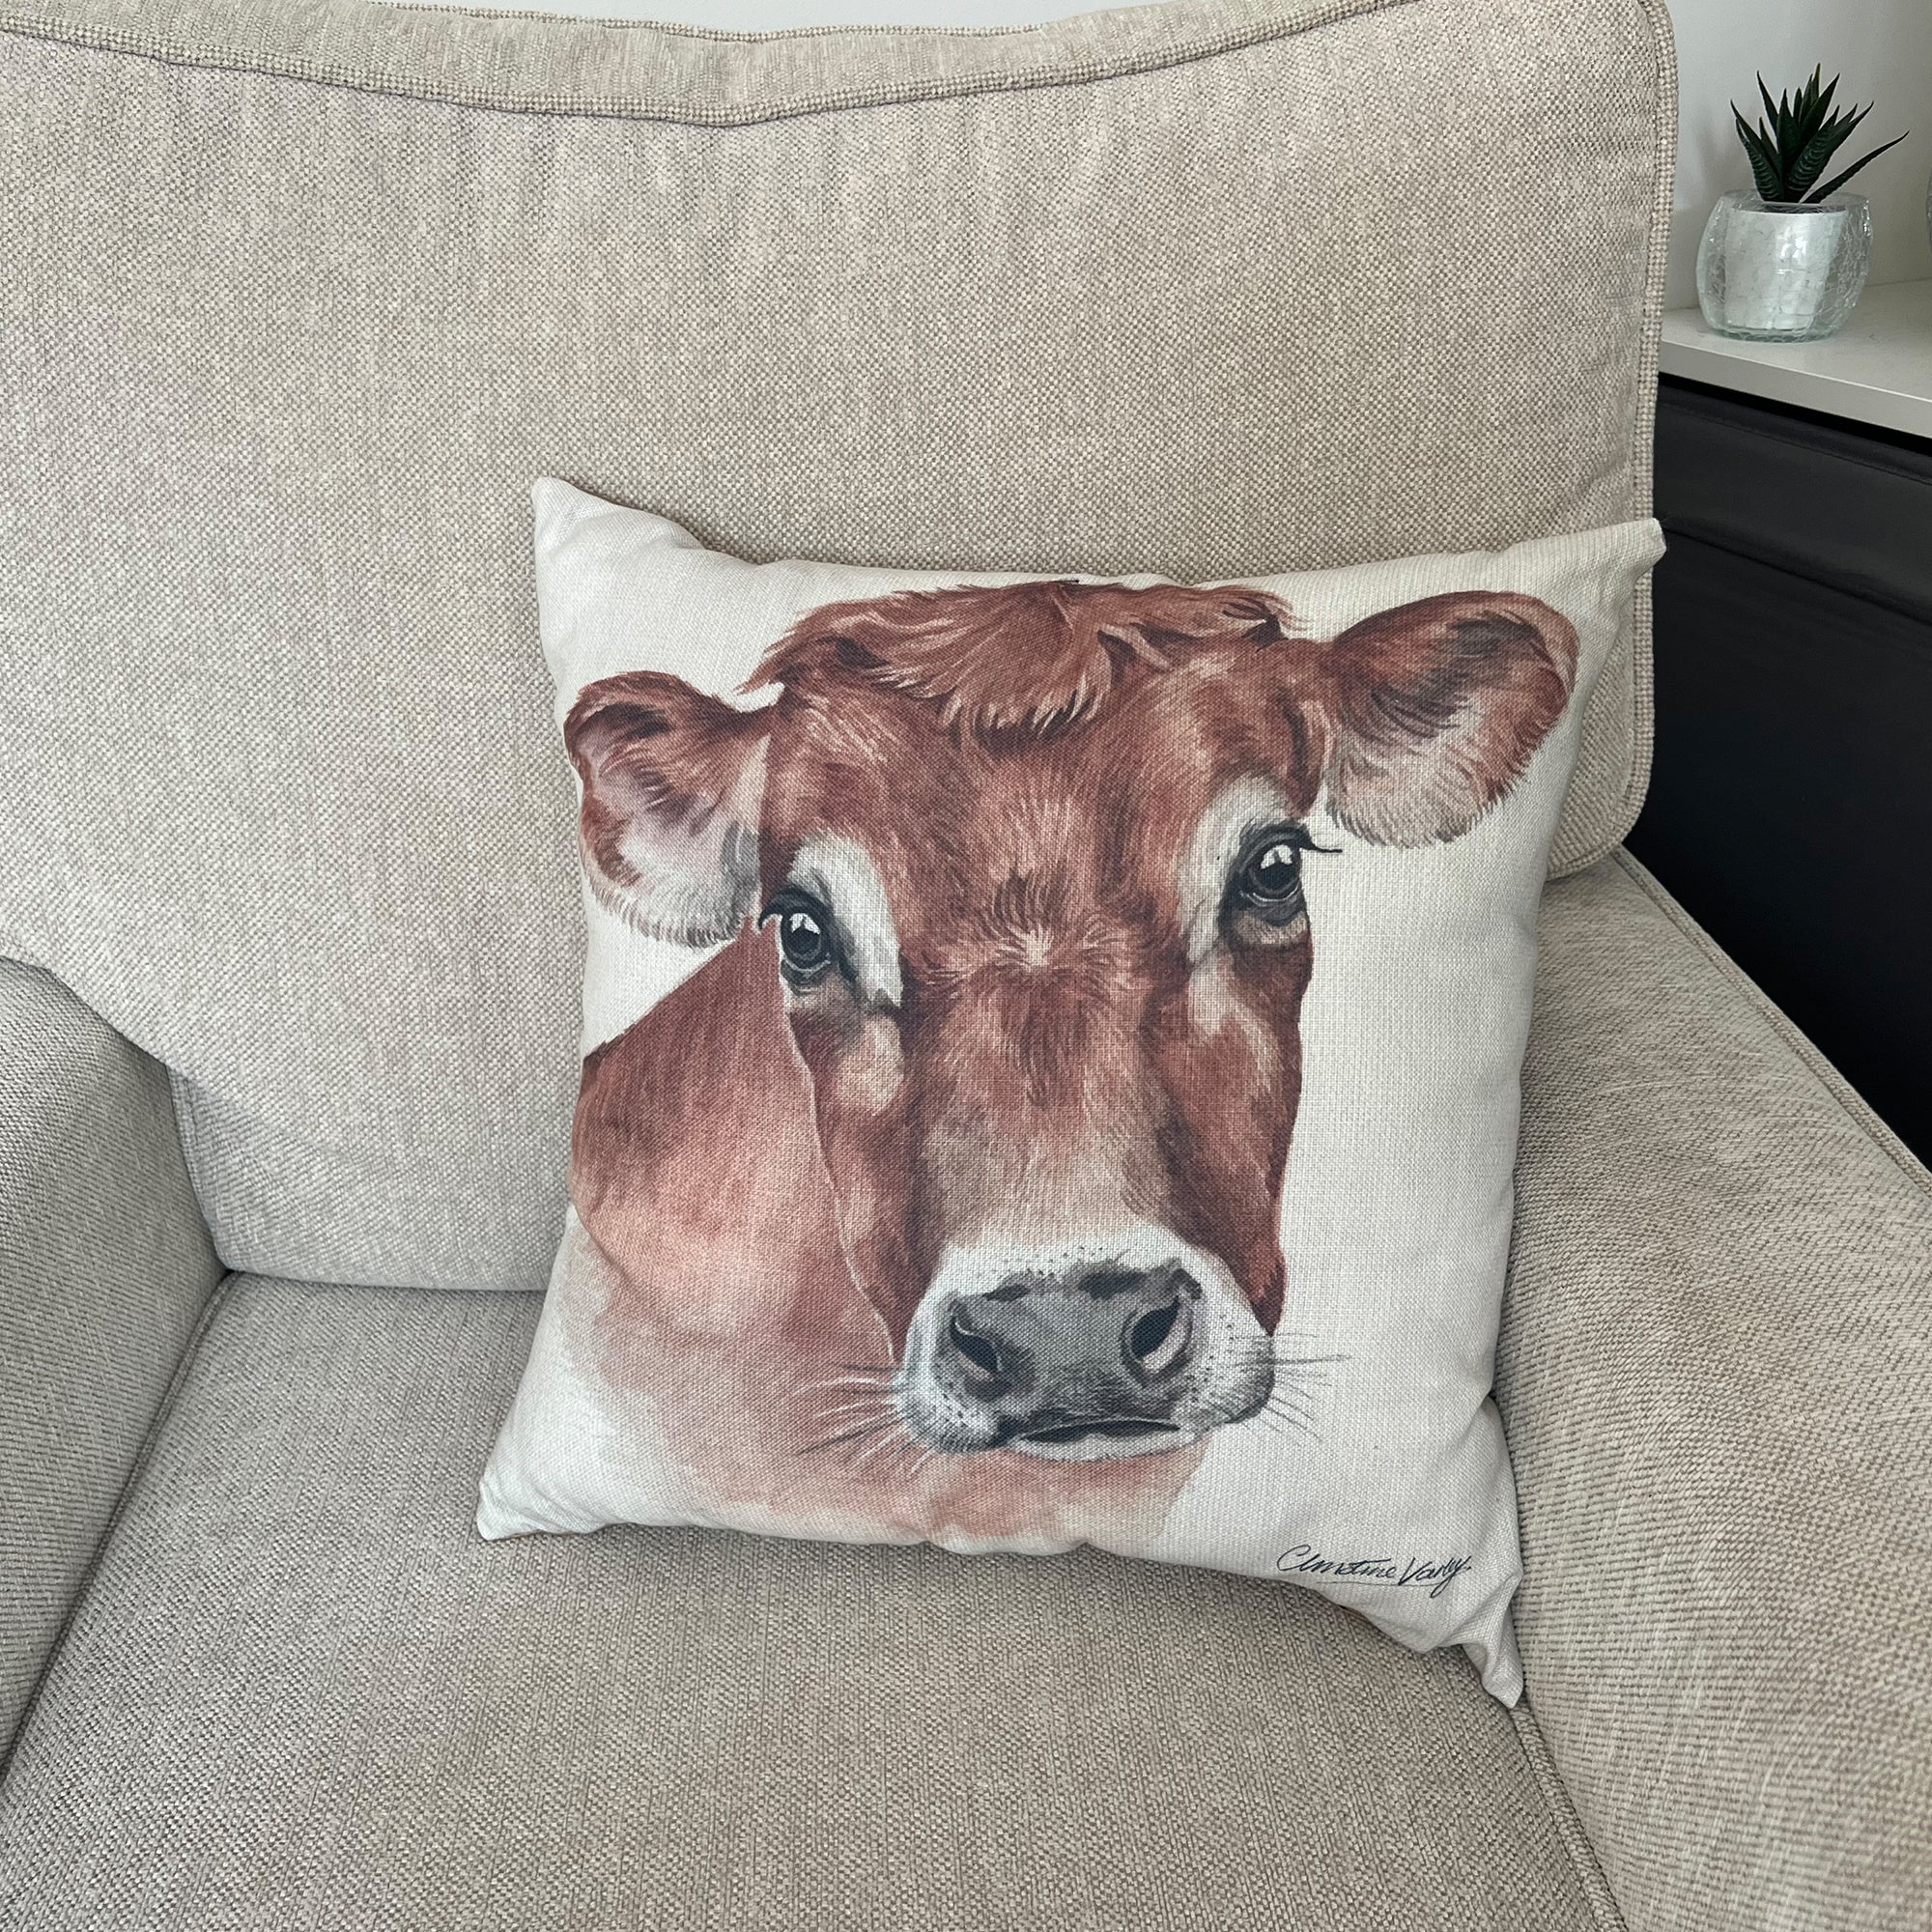 Christine Varley Jersey Cow Square Cushion